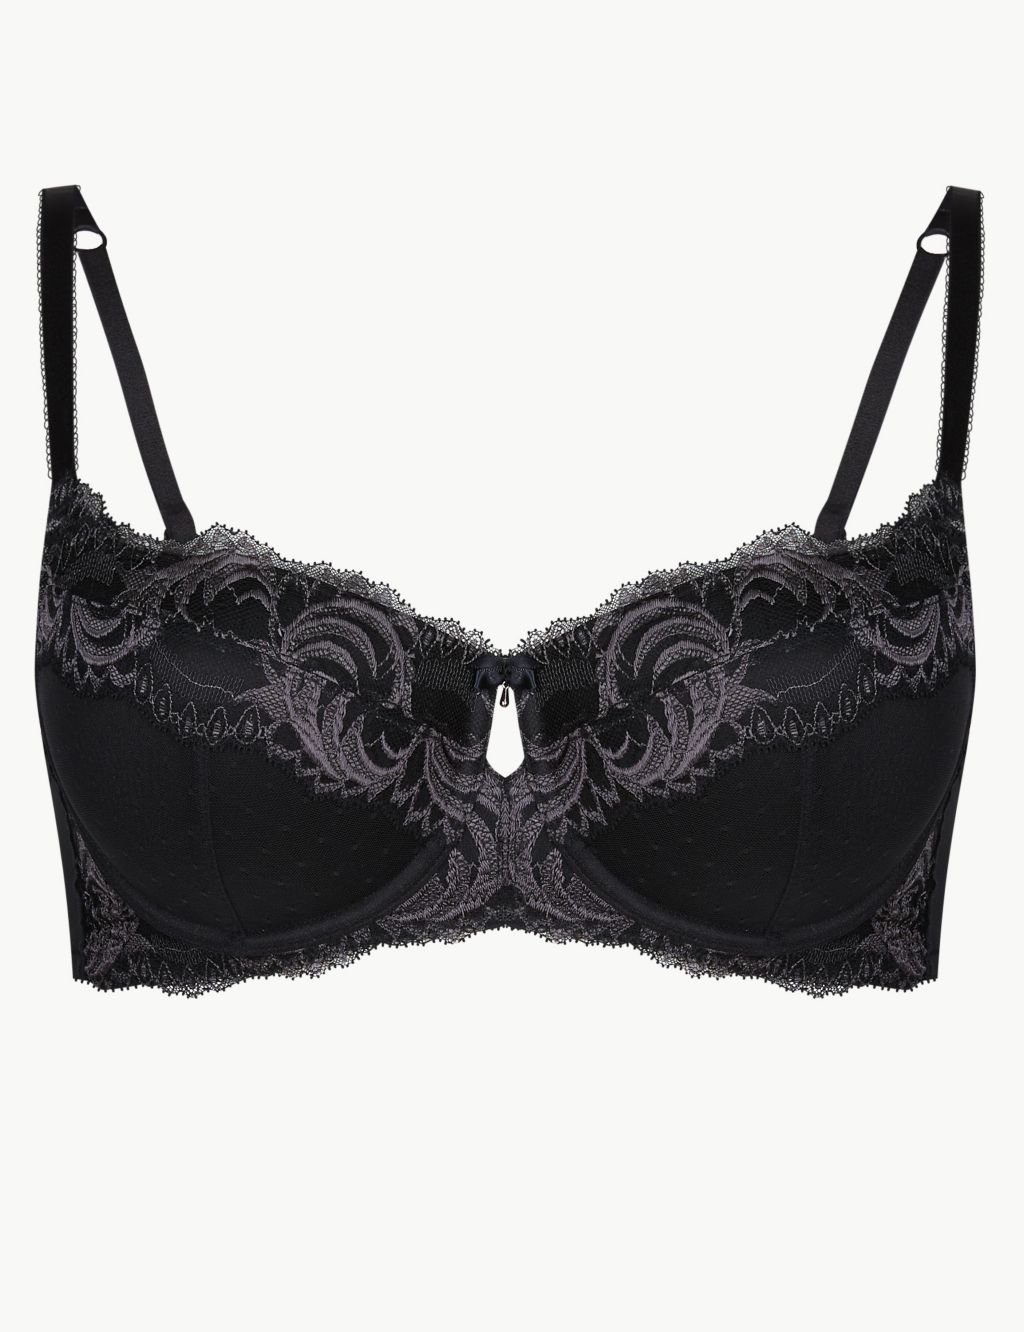 Sophia Lace Padded Balcony Bra A-E | M&S Collection | M&S